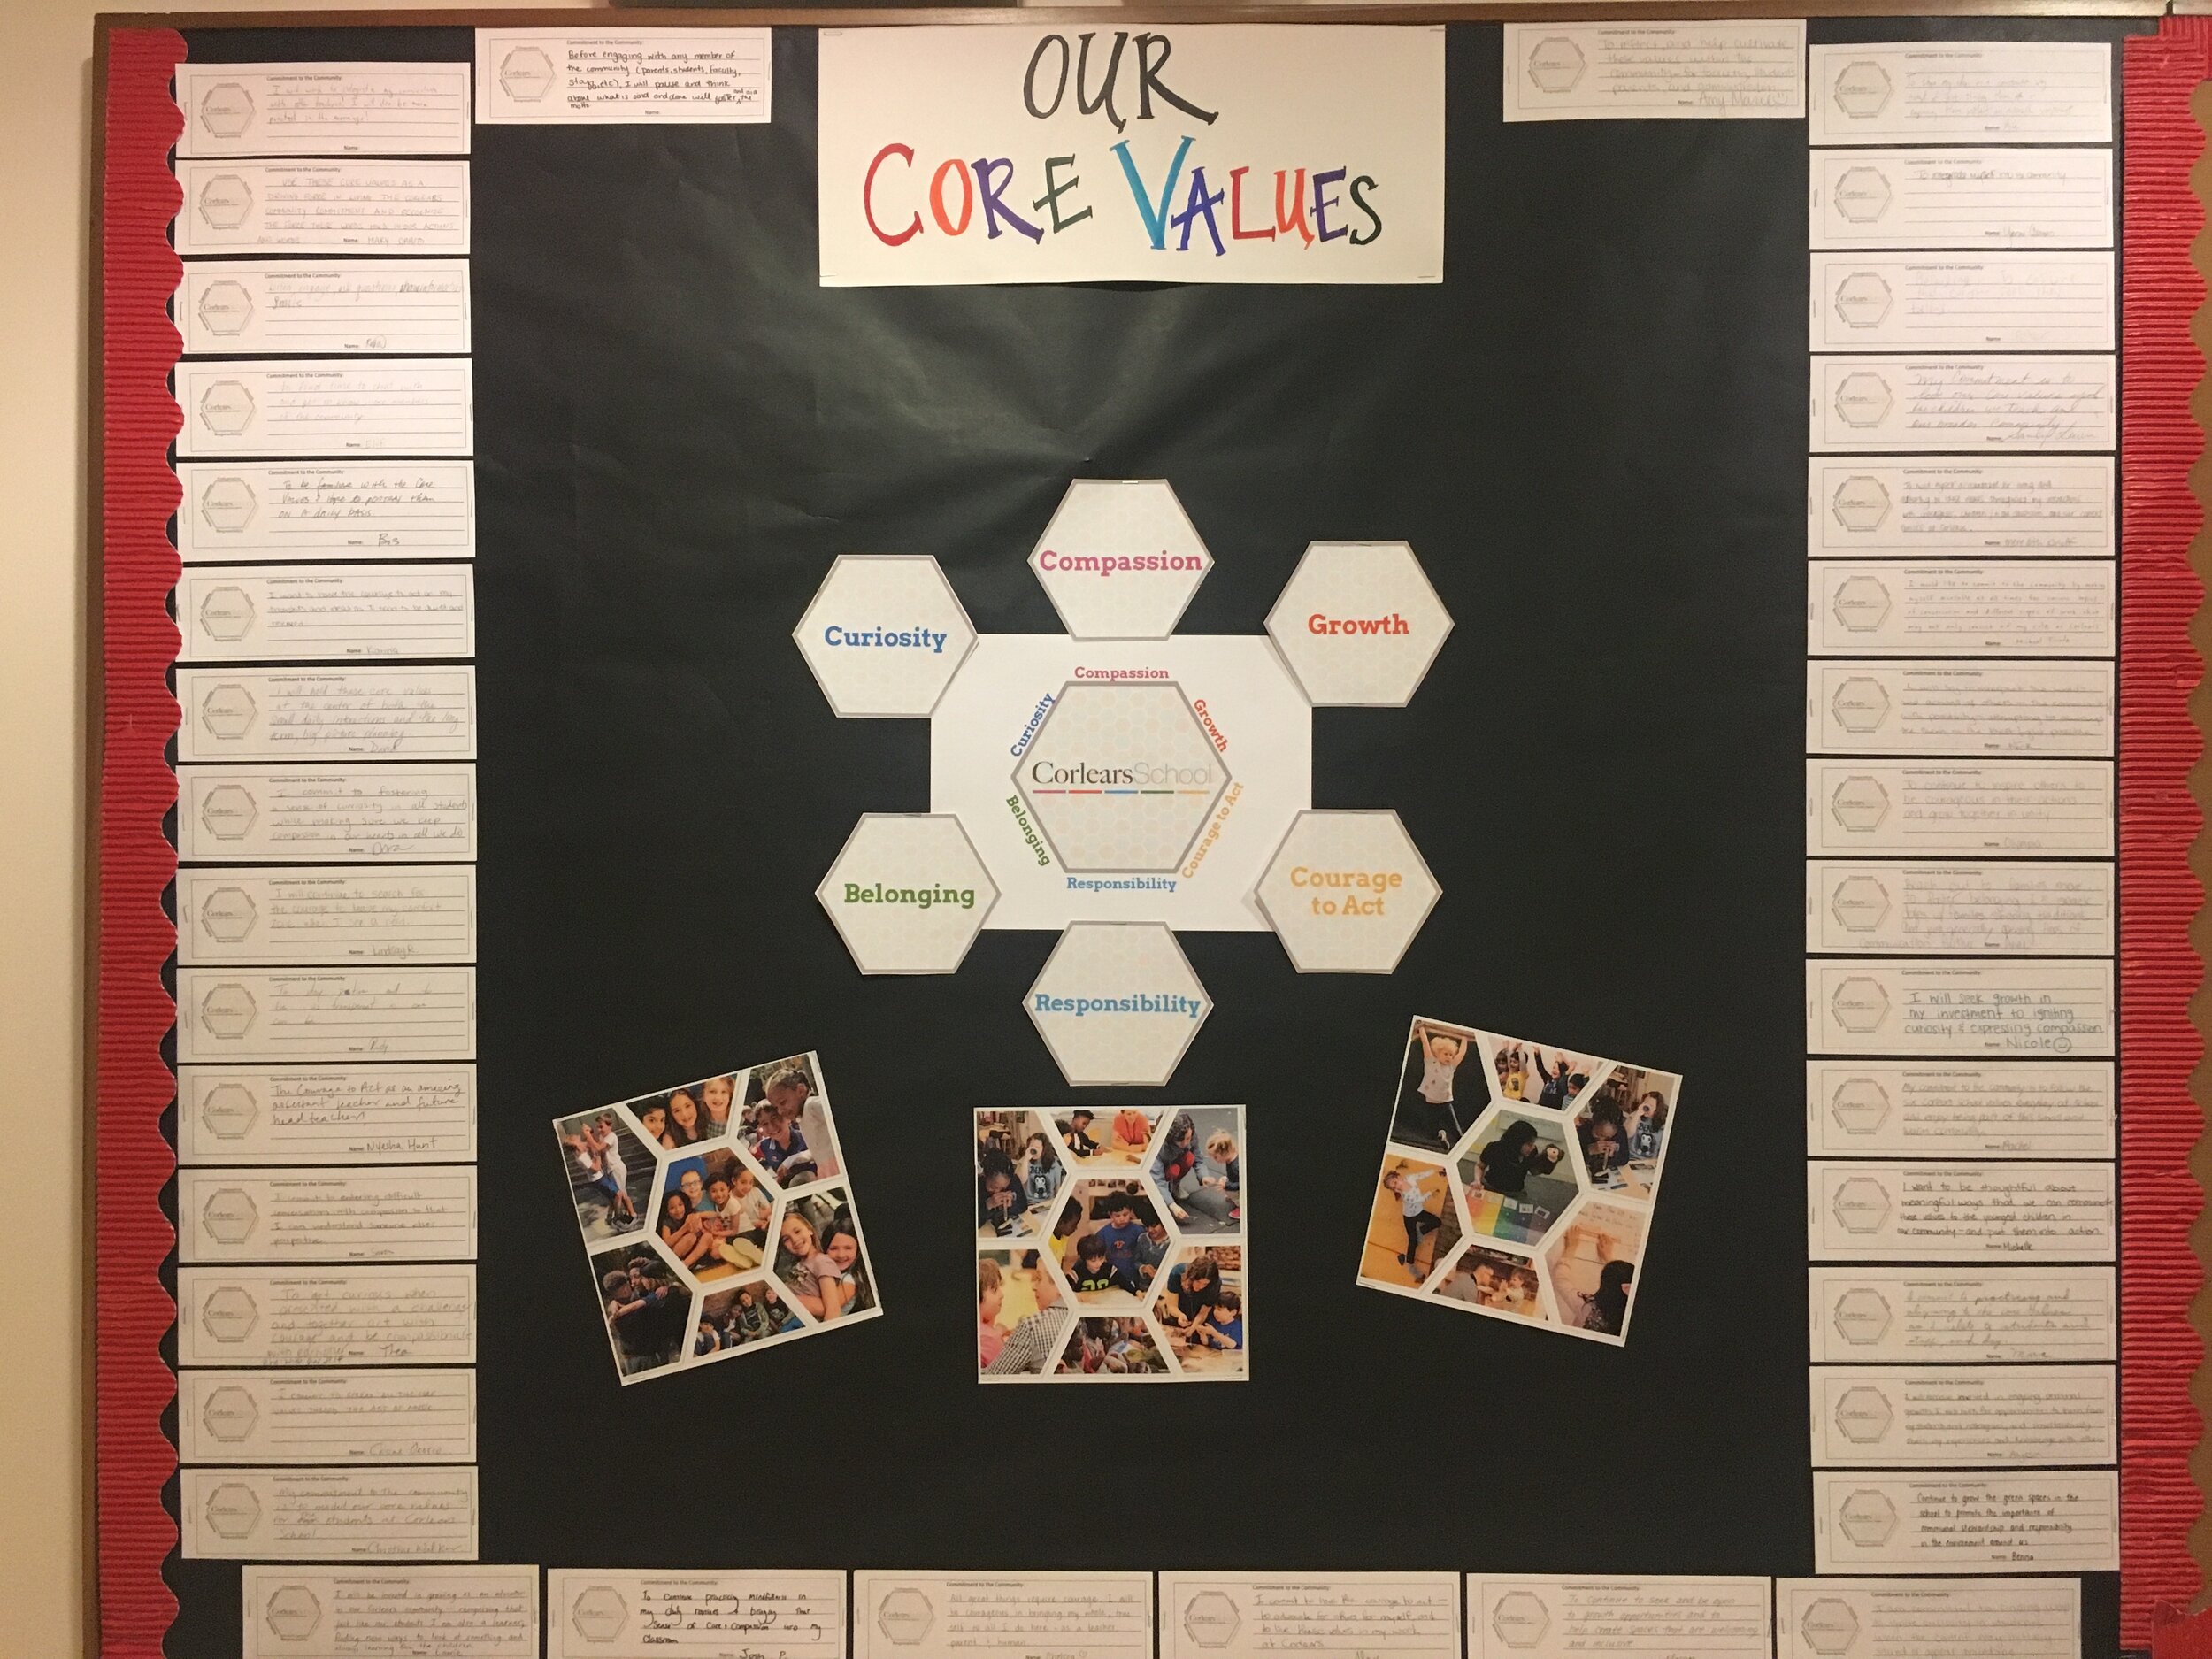 A bulletin board displaying faculty and staff’s commitments to living and upholding the values at Corlears.